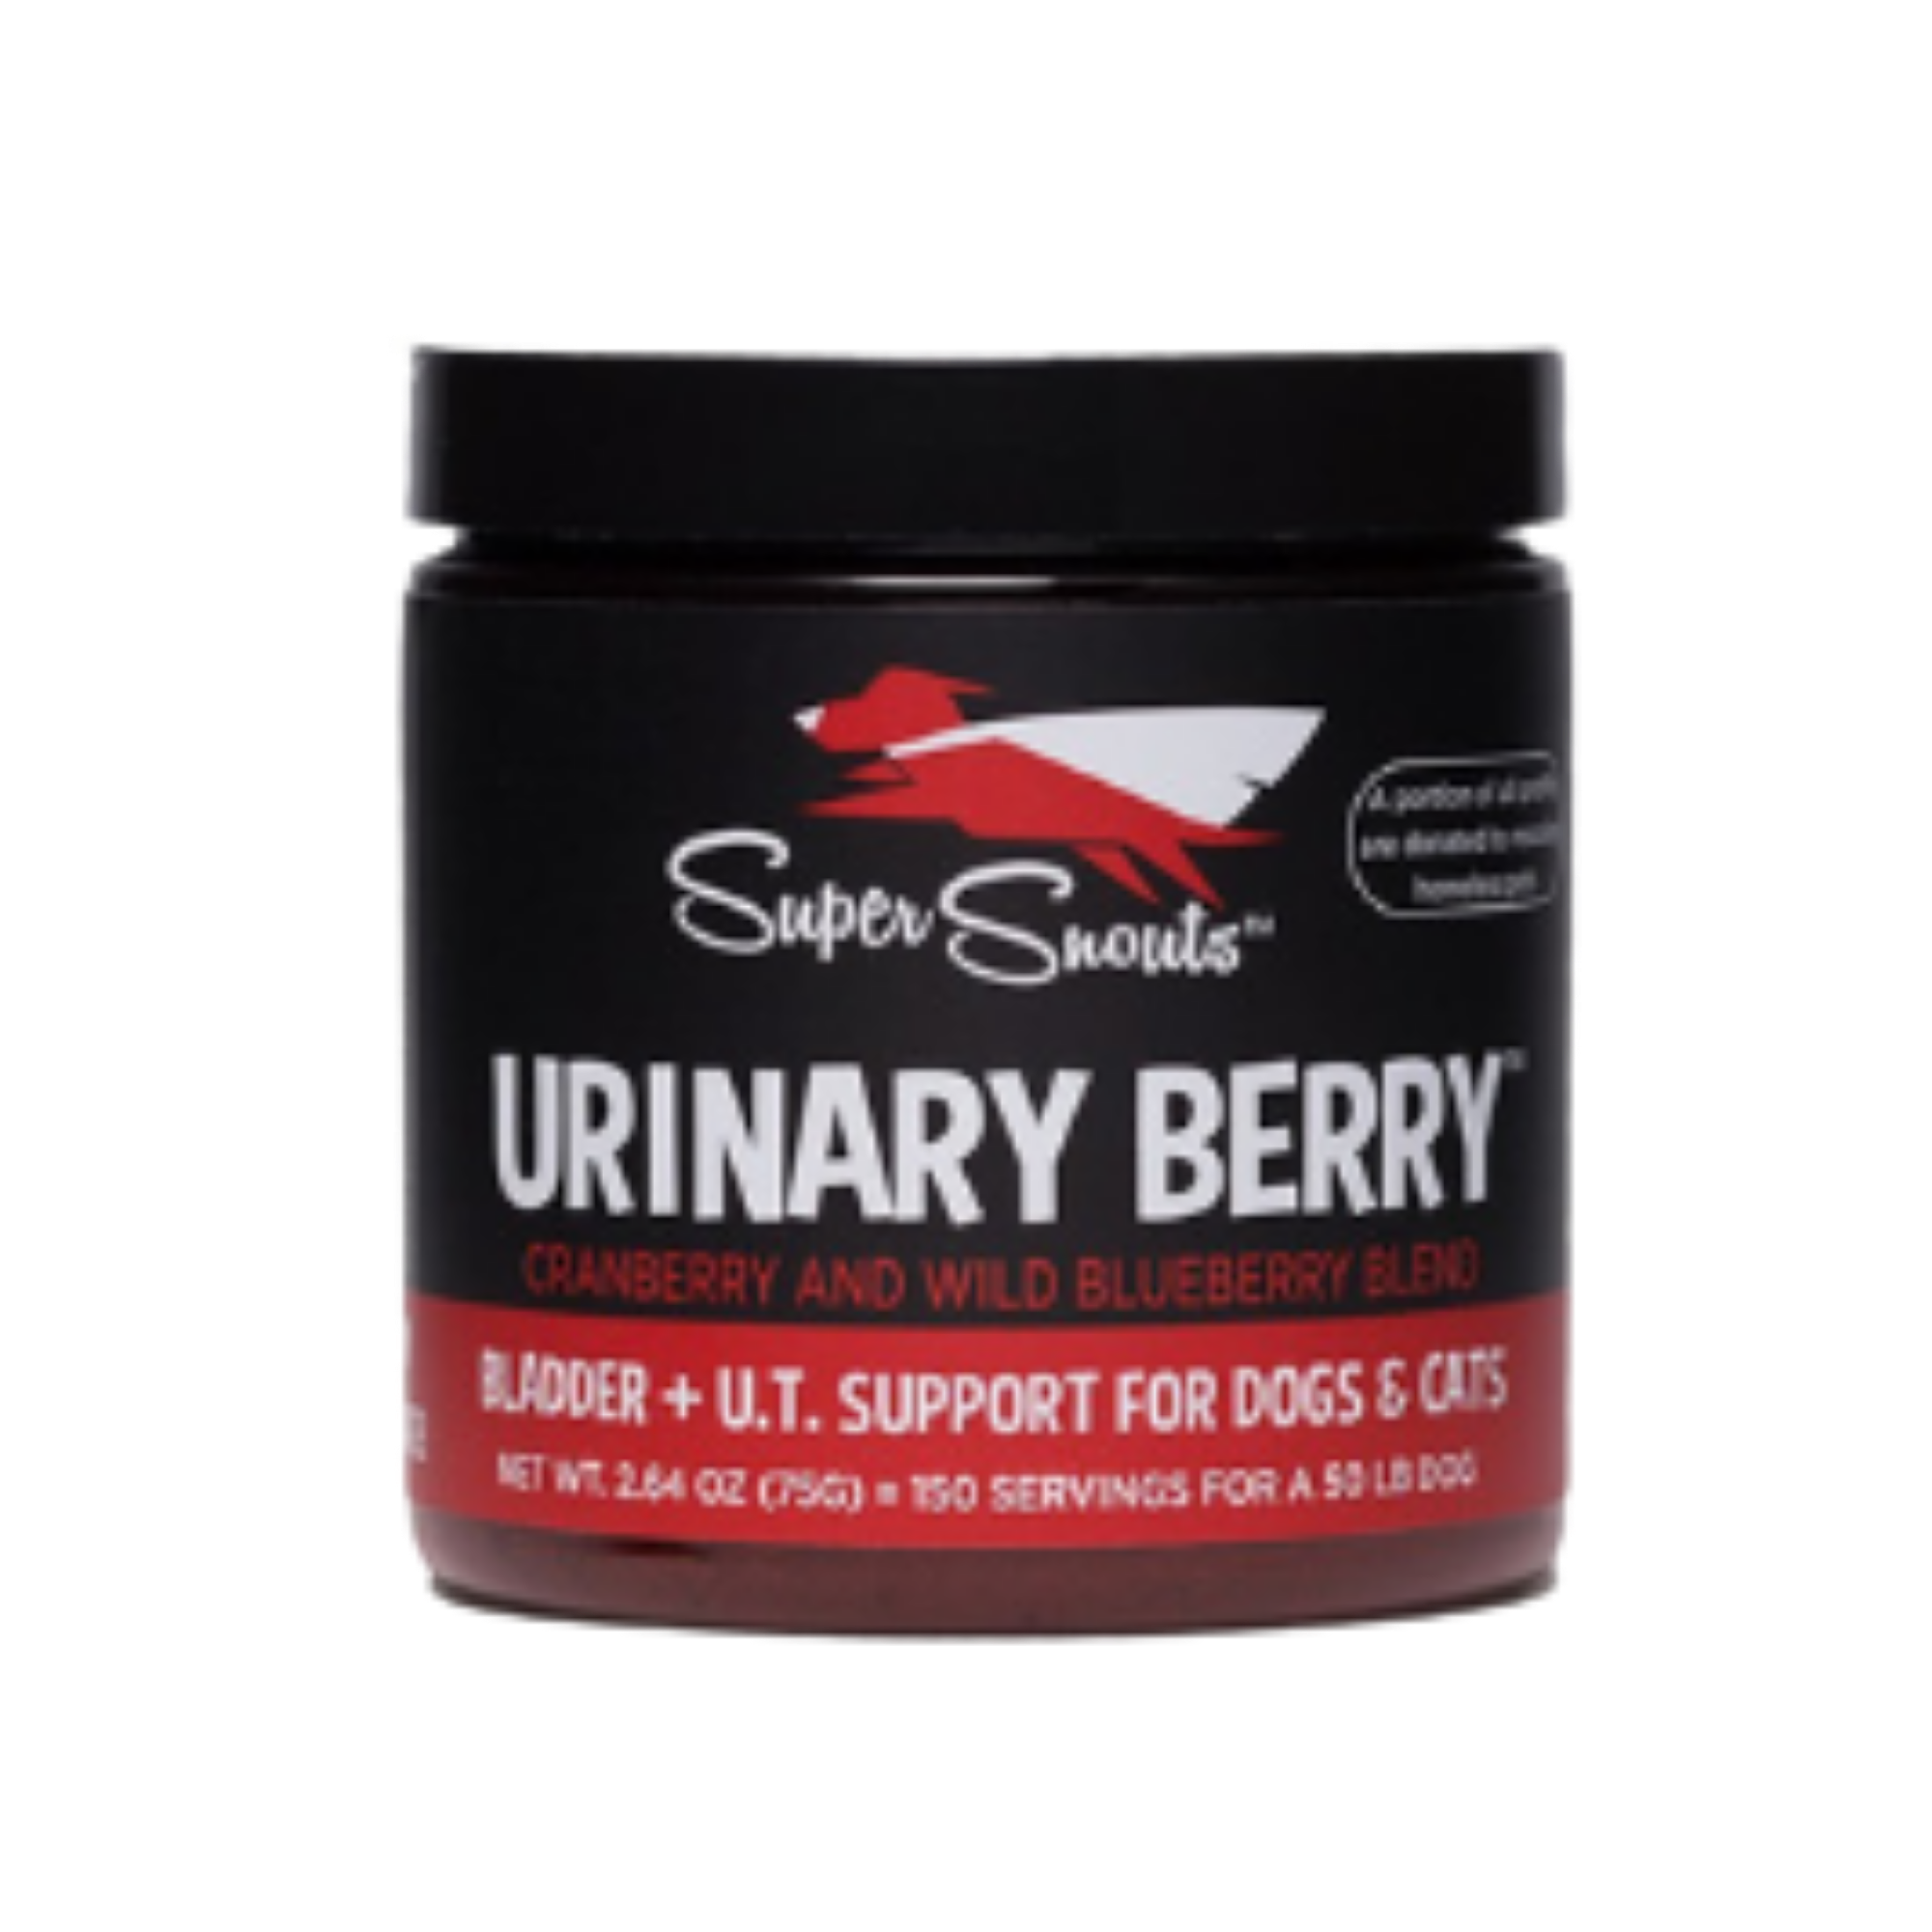 Super Snouts Urinary Berry Urinary Support Supplement for Dogs & Cats 2.64 oz